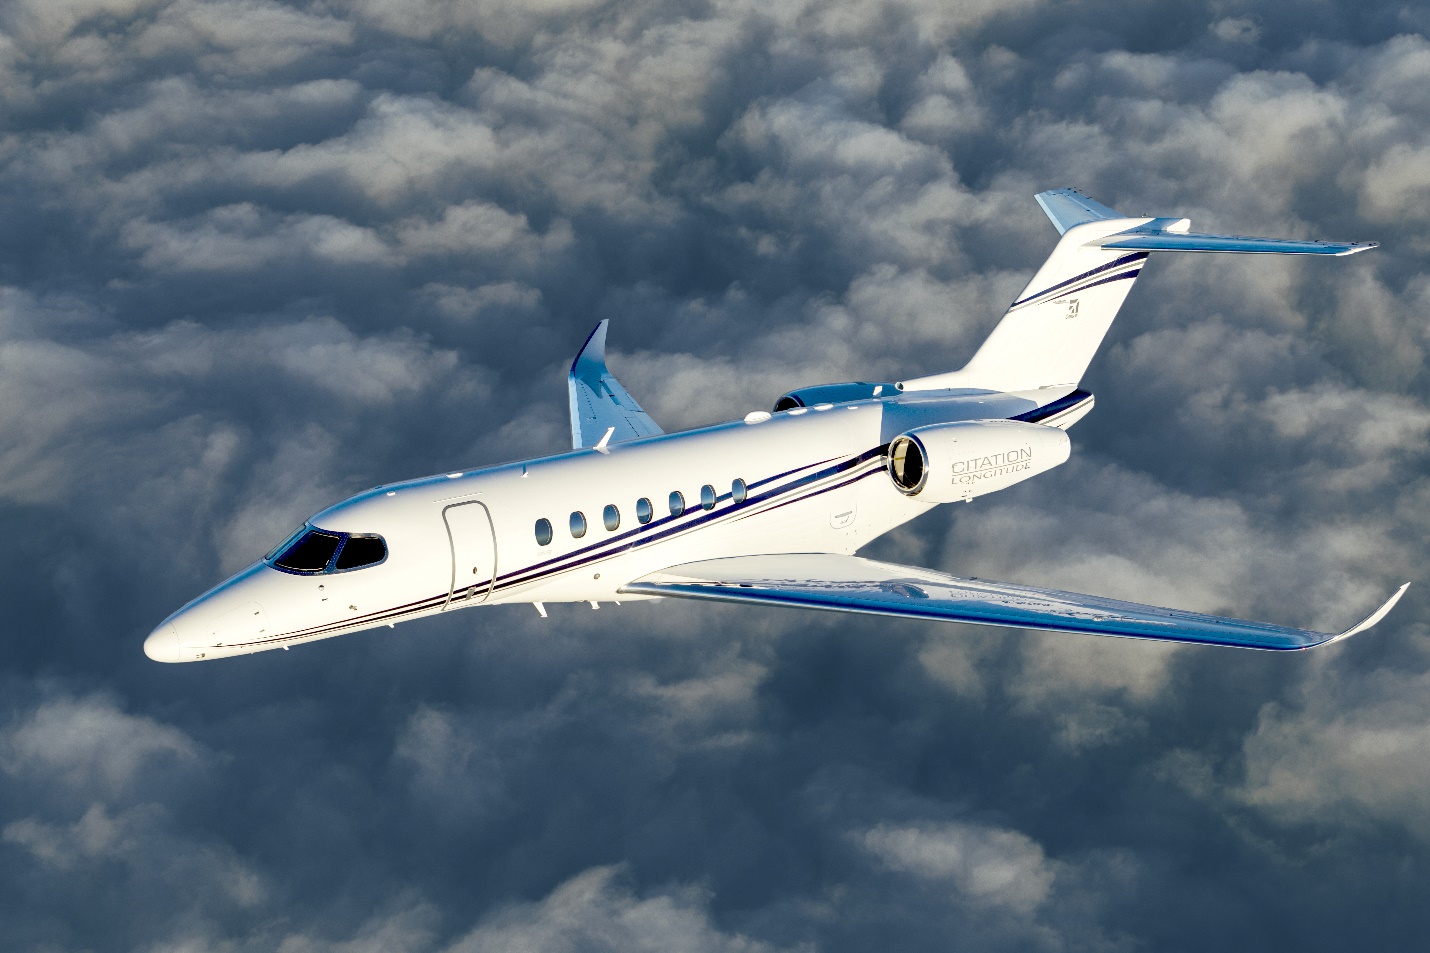 Textron Aviation inks order for three Cessna Citation jets in support of the government of Turkey flight inspection missions